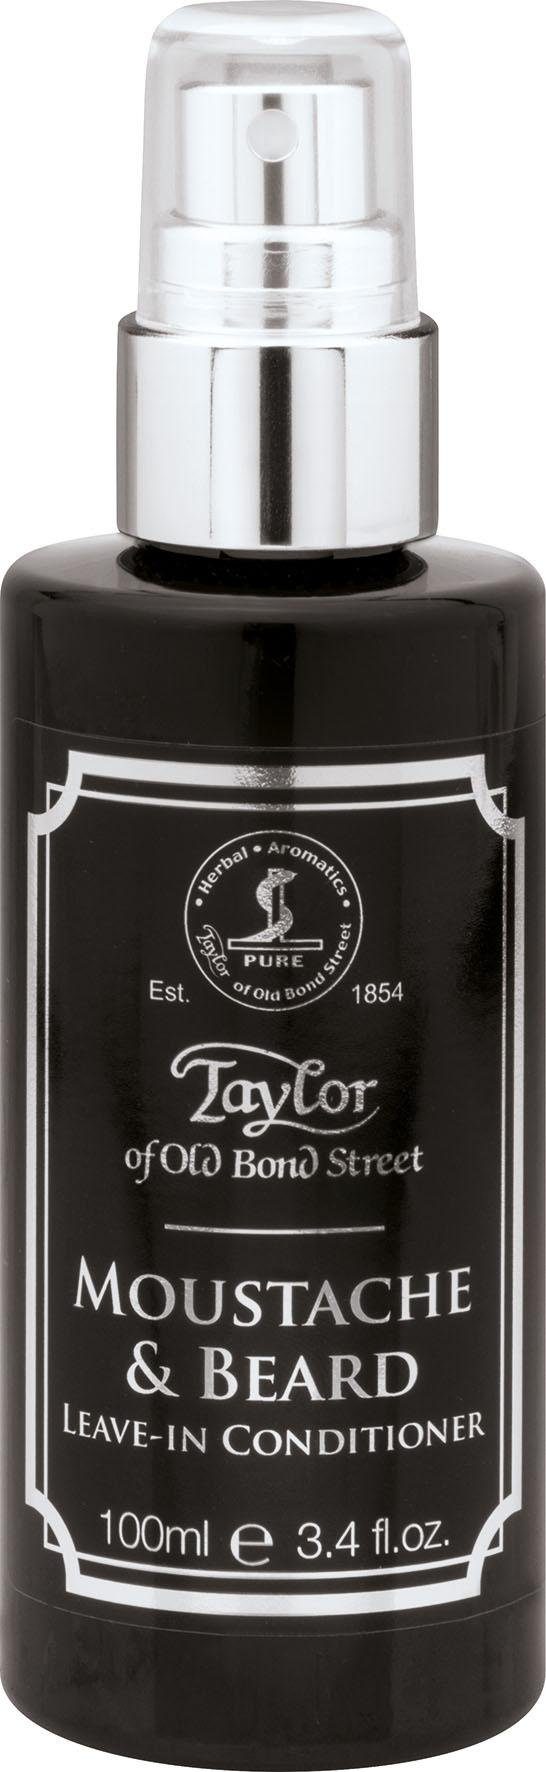 Bond of Bartconditioner Conditioner Leave-In Beard Old & Moustache Taylor Street